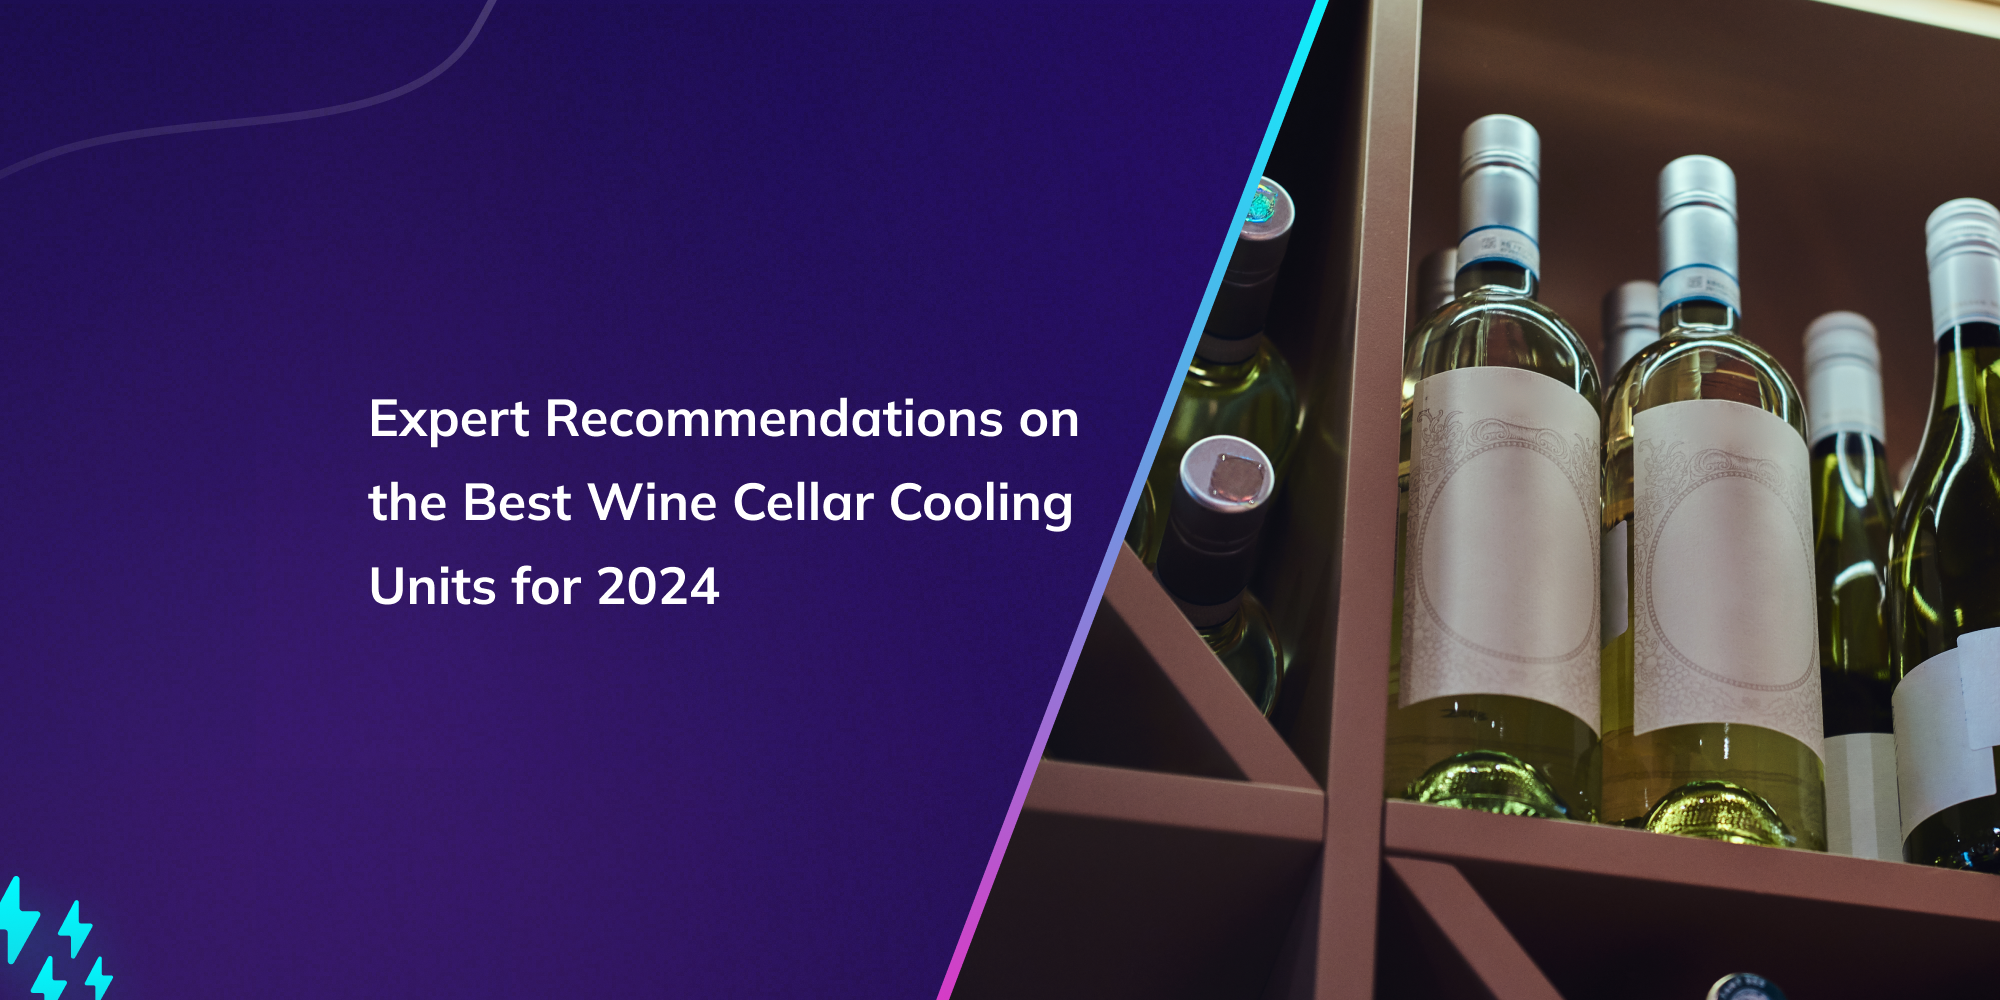 Expert Recommendations on the Best Wine Cellar Cooling Units for 2024